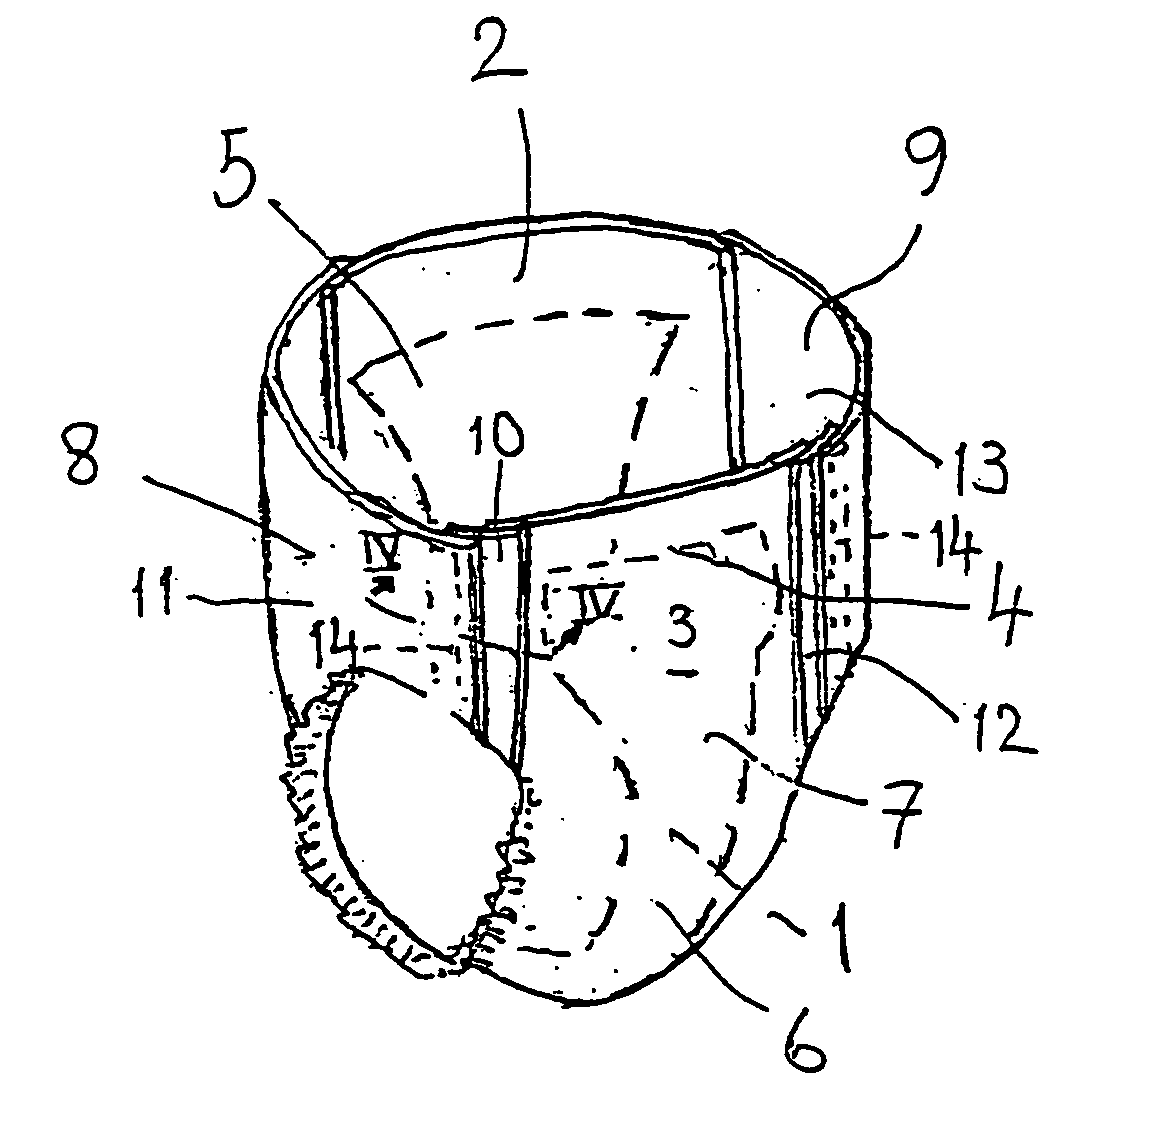 Method for production of diaper pants having a detachable and resealable connection member